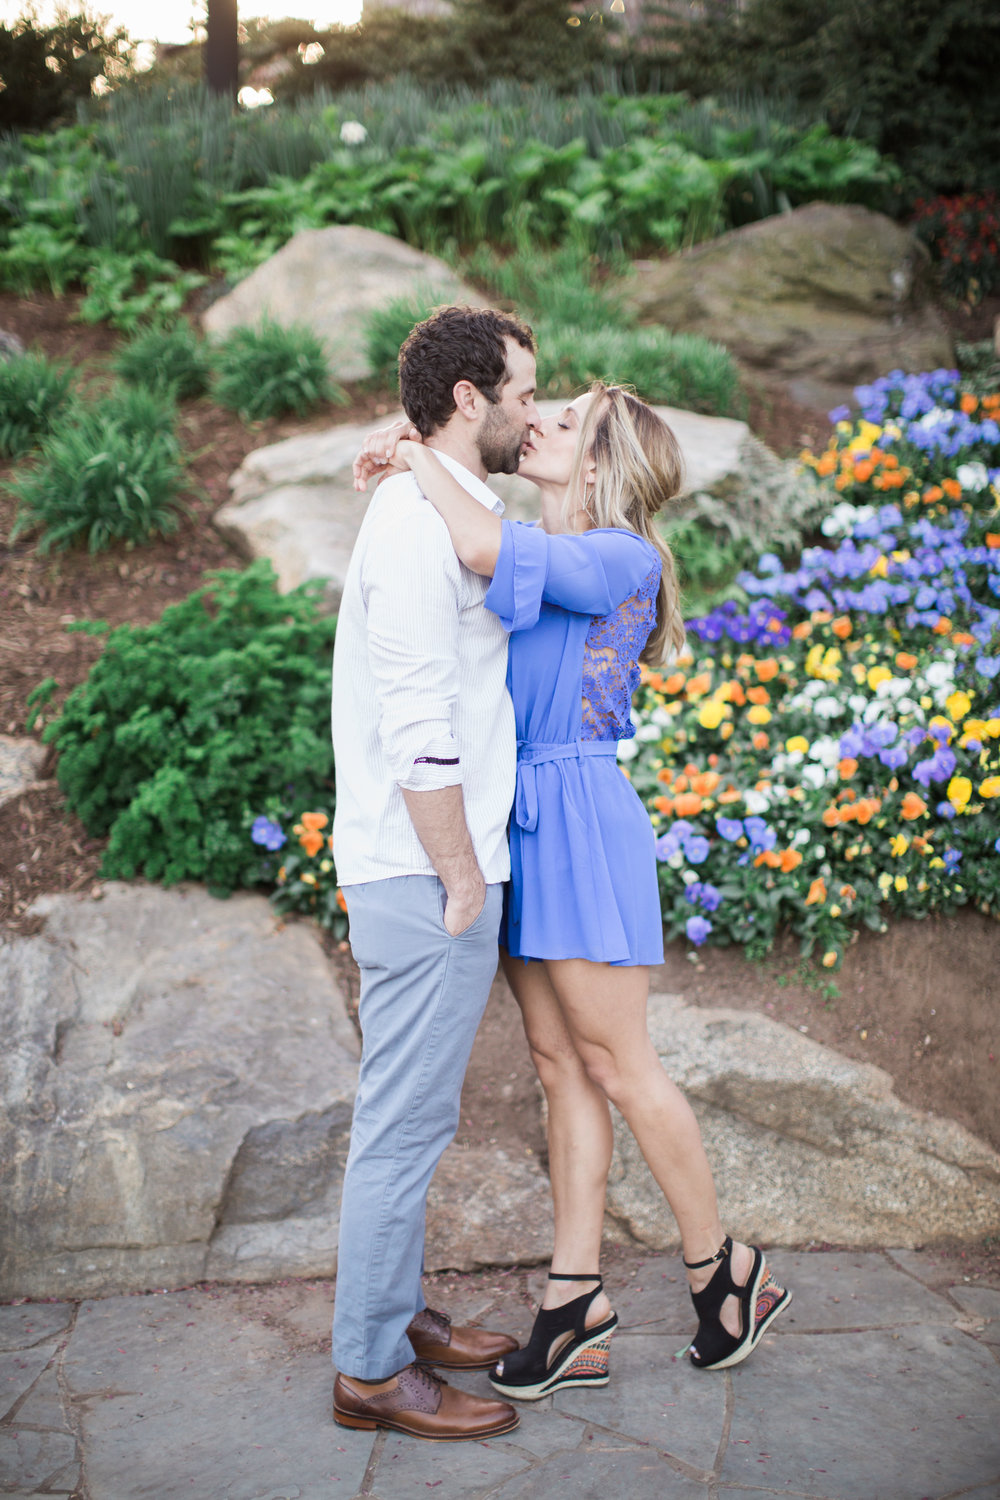 Kissing in front of flower bed
